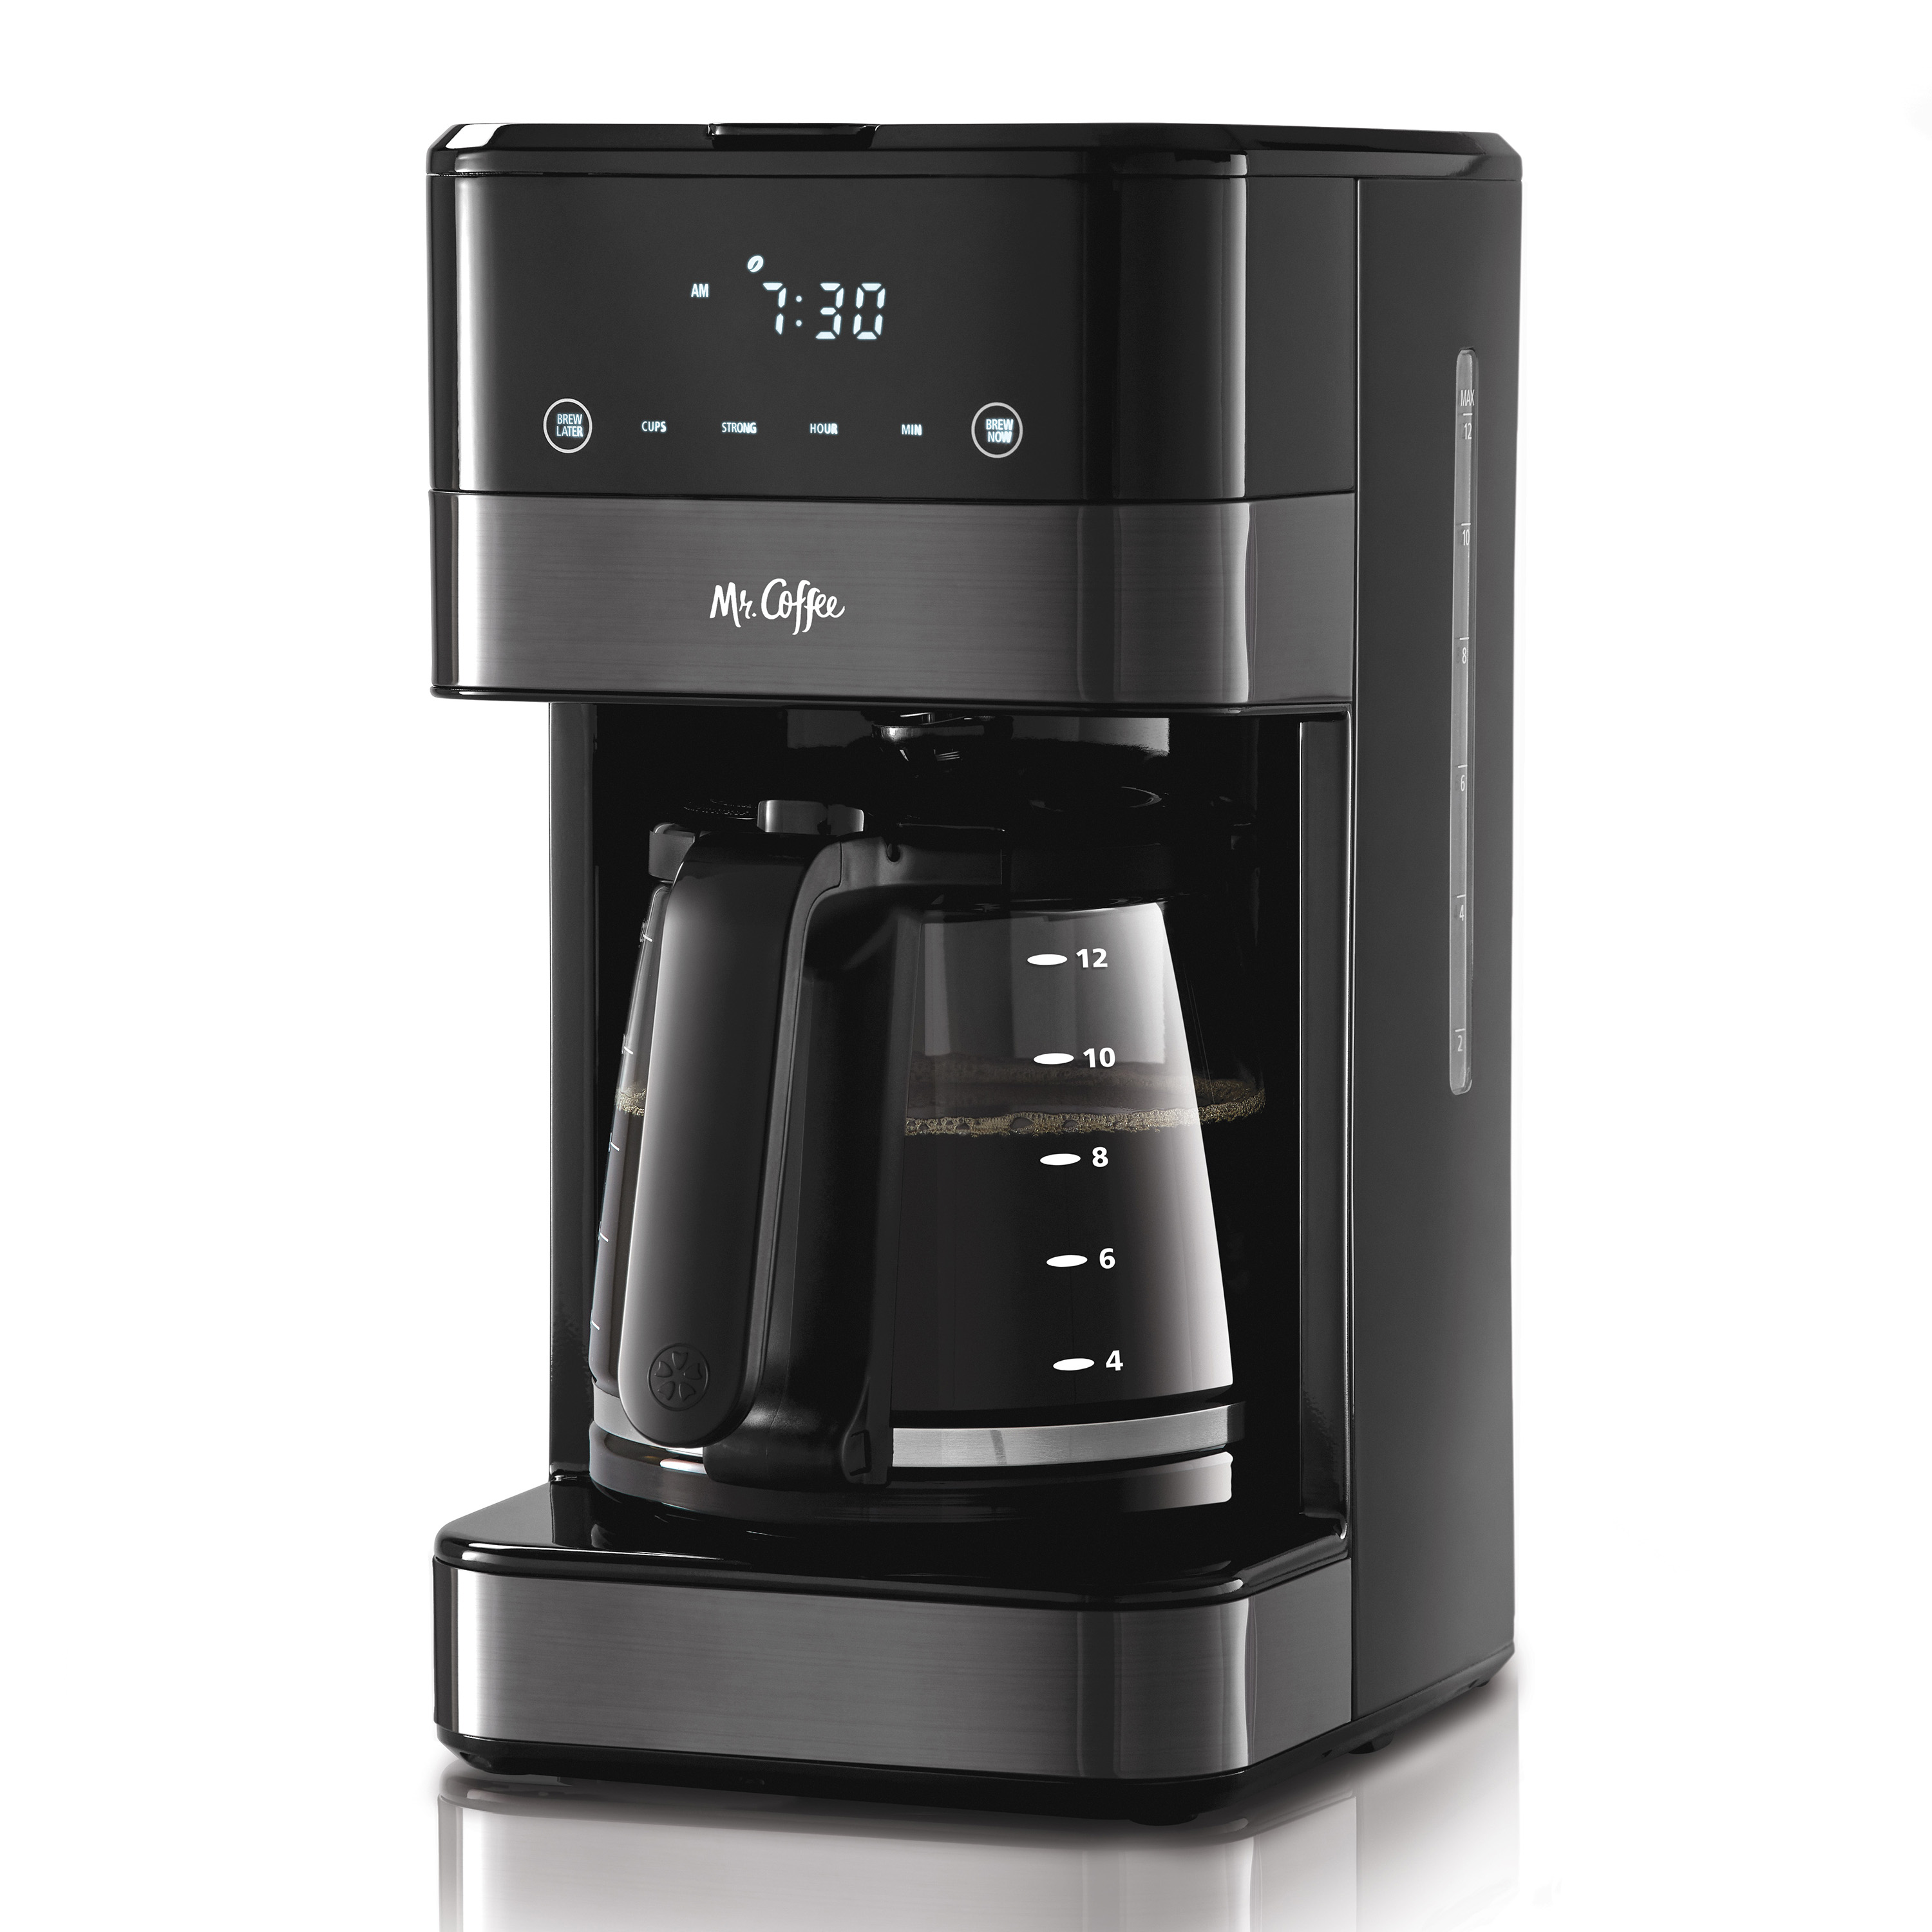 Mr. Coffee 12 Cup Programmable Coffee Maker, LED Touch Display, Black Stainless - image 2 of 9